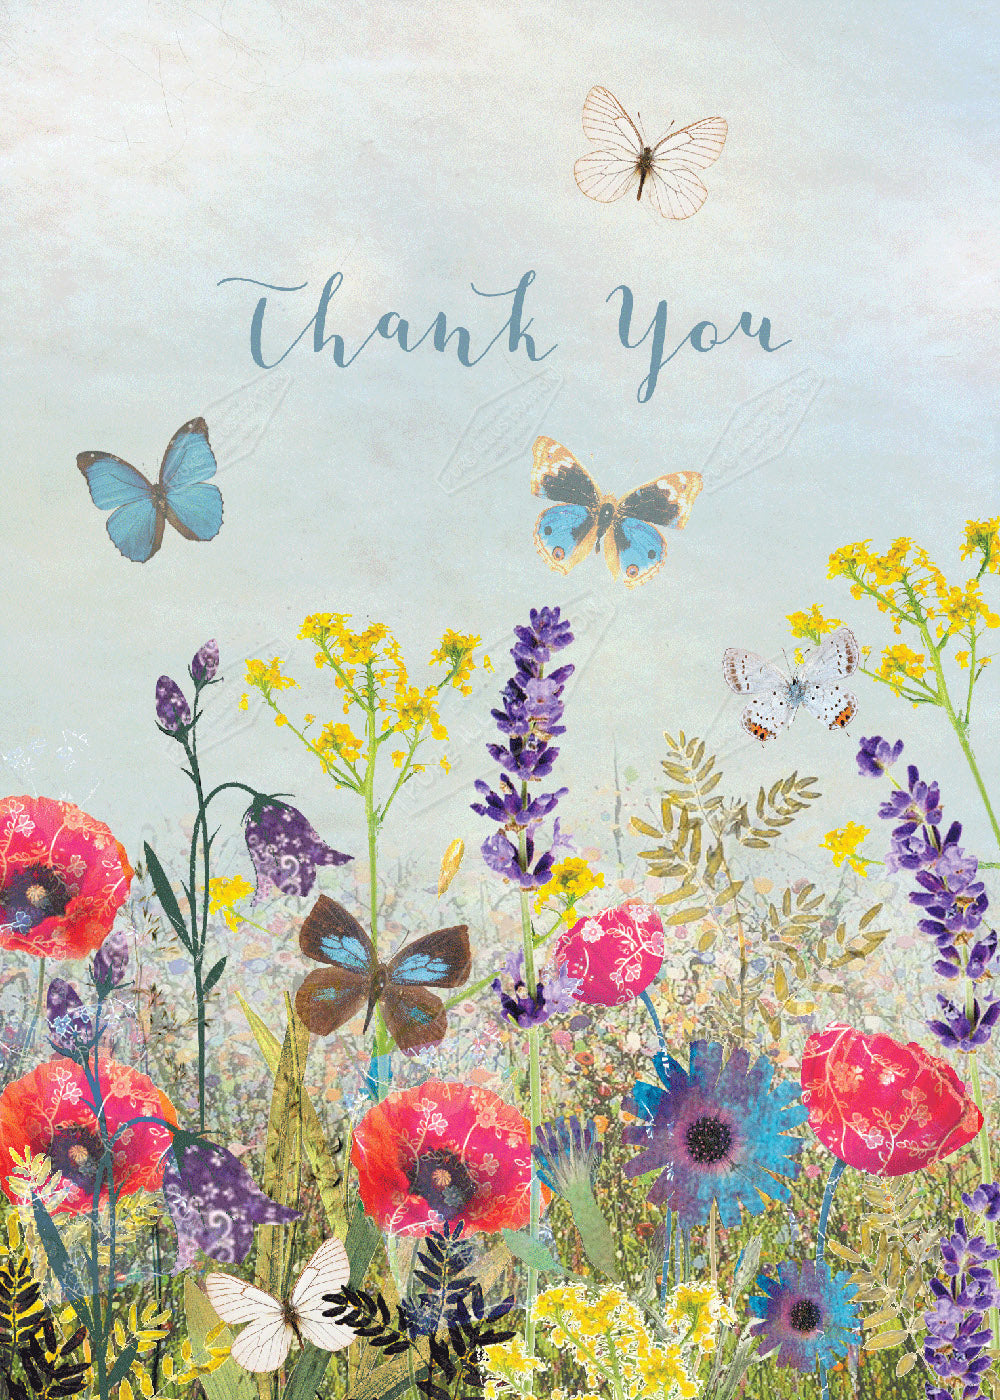 00032651DEV - Deva Evans is represented by Pure Art Licensing Agency - Thank You Greeting Card Design